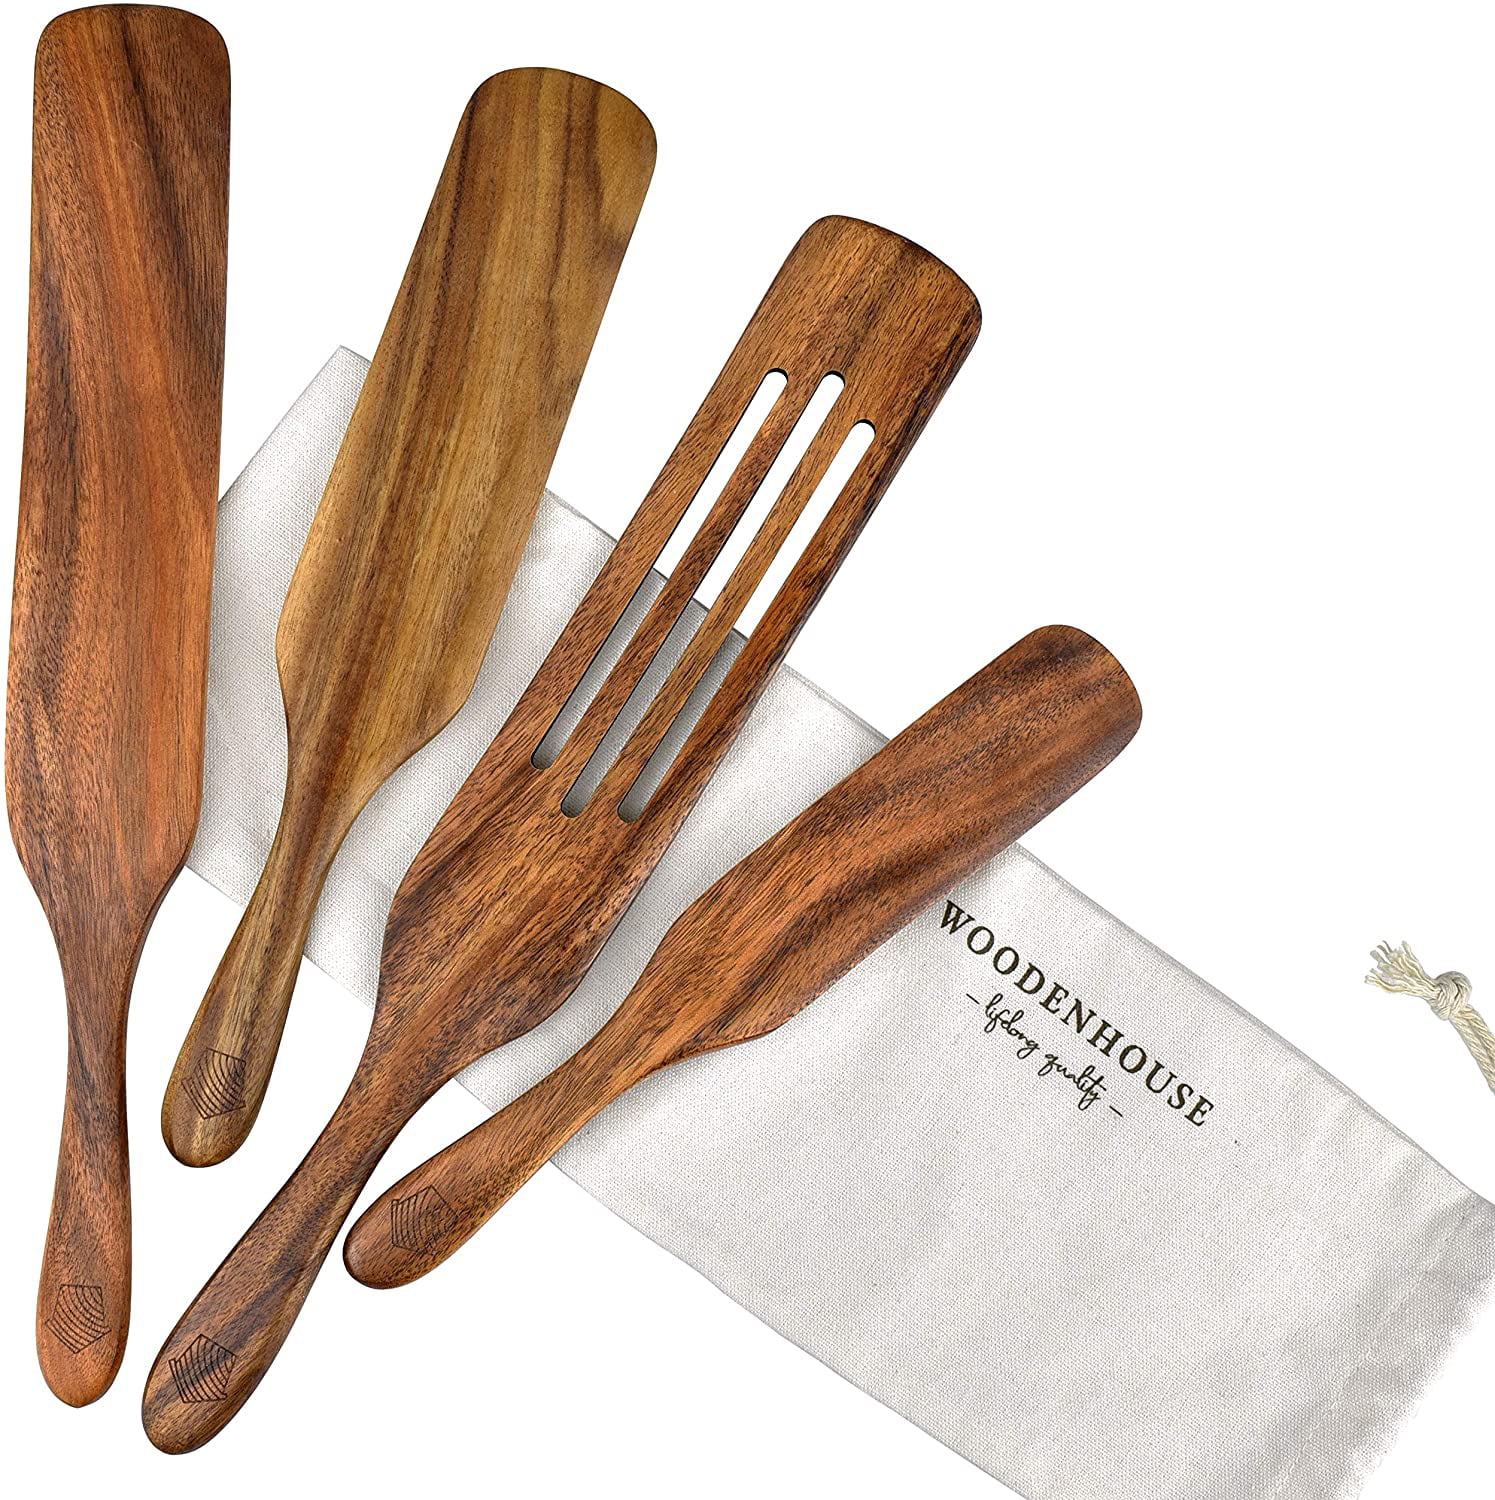 Heat Resistant Spatulas for Nonstick Cookware Stir Spread Serving in Premium Teak Wood Spurtle Set of 5 Scrape Wooden Spoons for Cooking Sift Whisk Spurtles Kitchen Tools as Seen on TV 